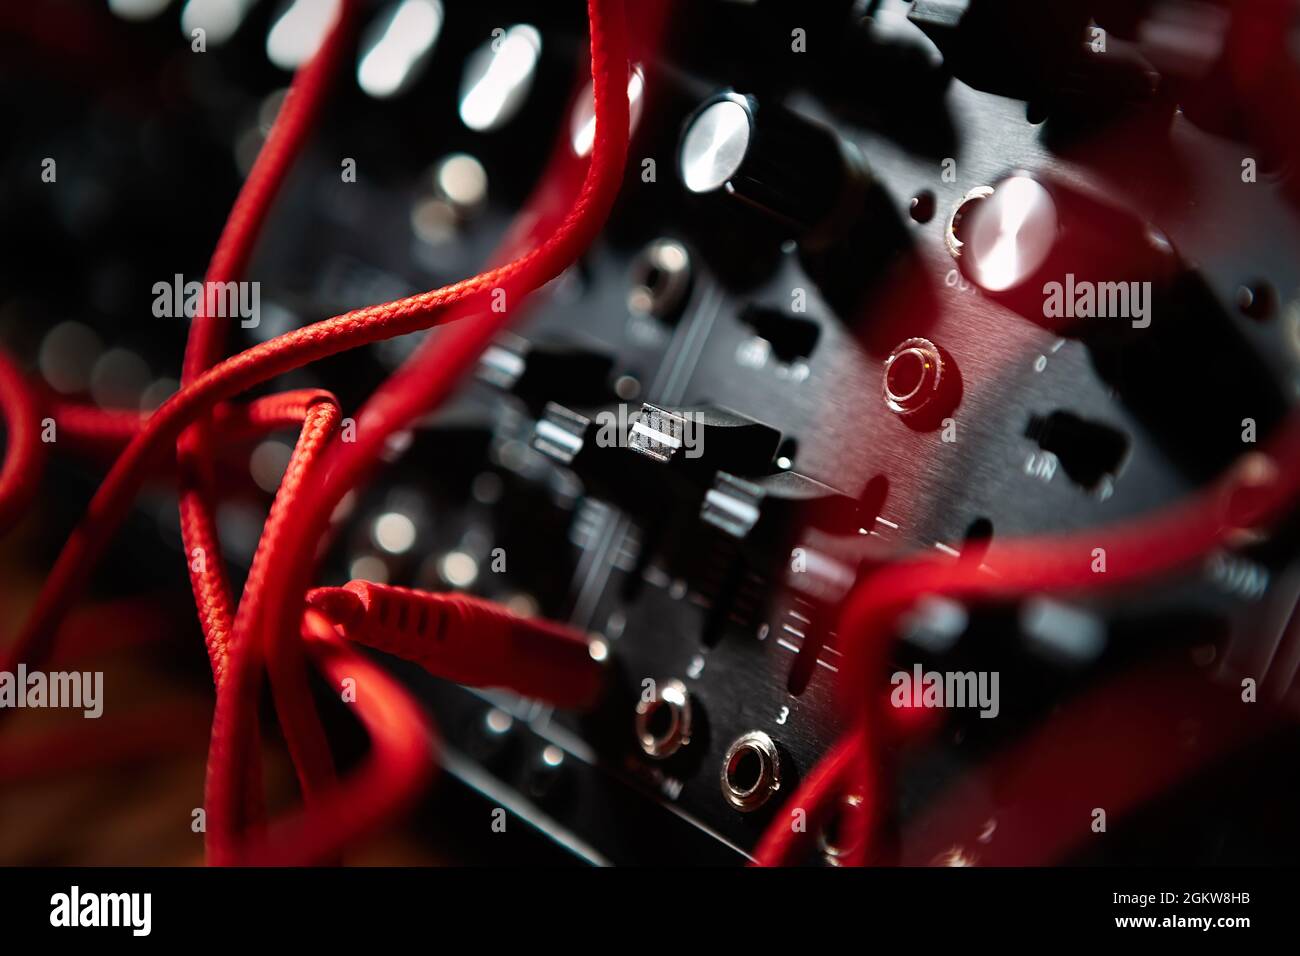 Modular synthesizer device. Analog synth for electronic music production in sound recording studio. Compose new musical tracks with professional audio Stock Photo